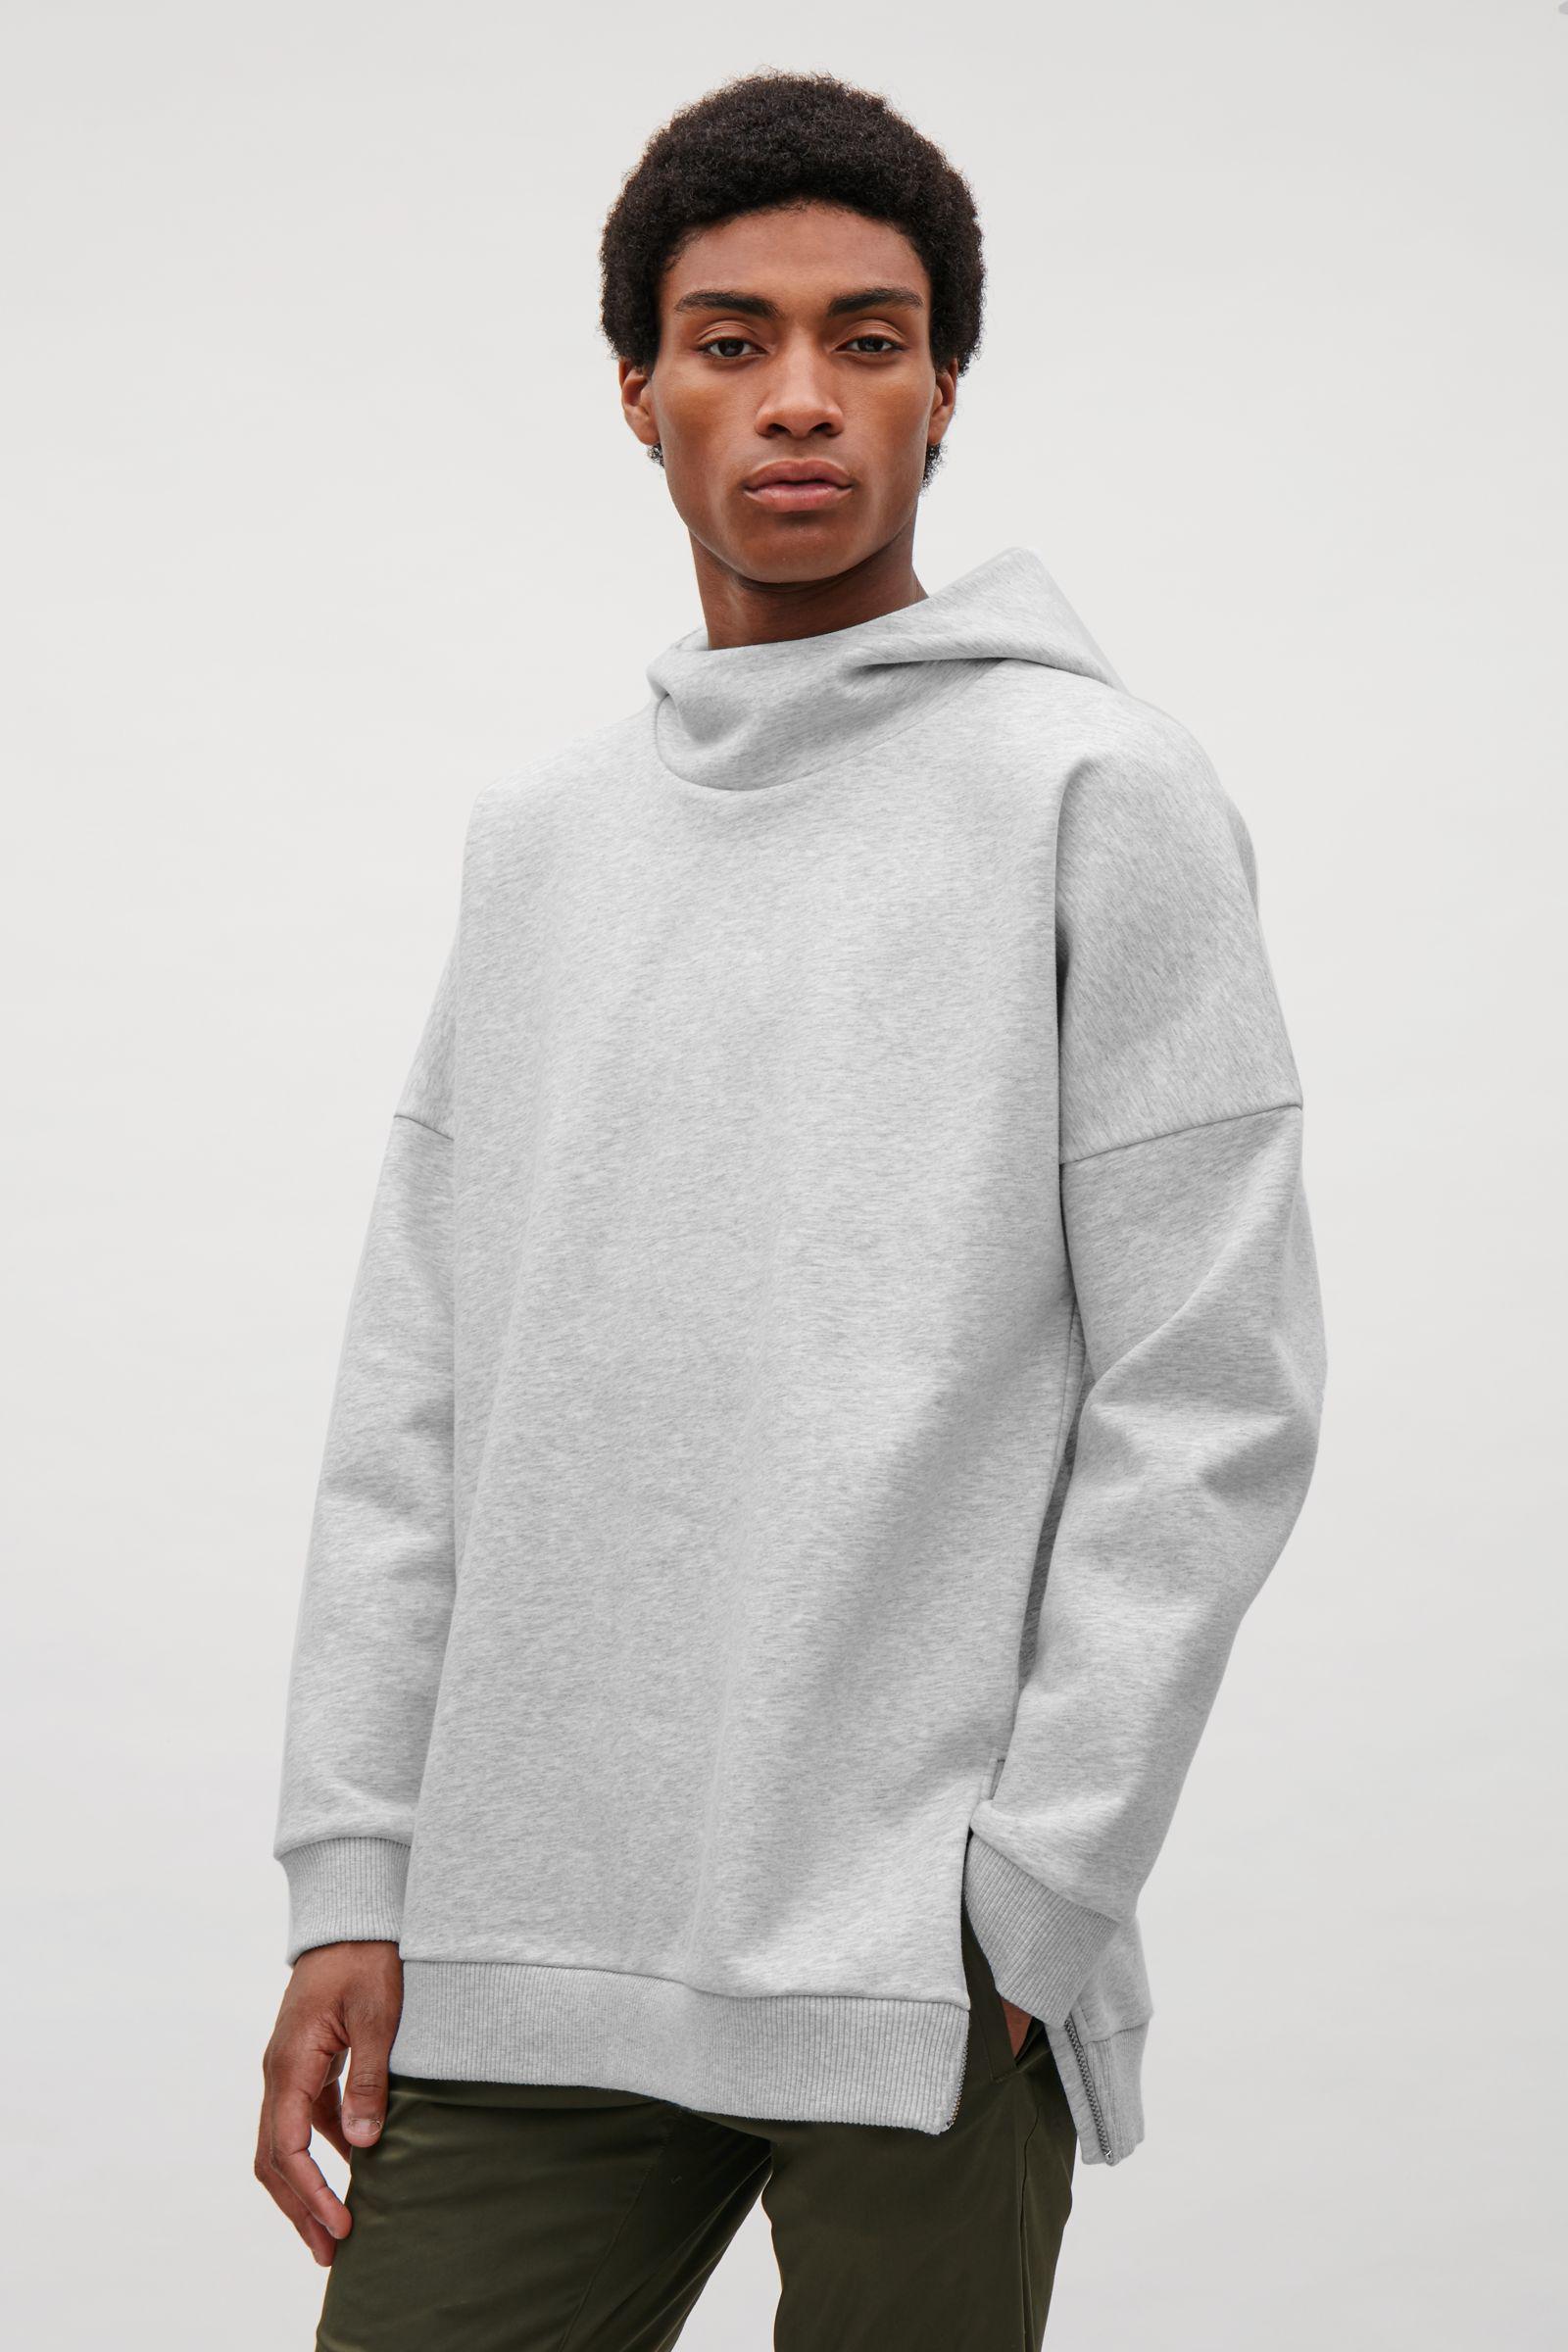 COS Cotton Jersey Hoodie With Zips in Light Grey (Gray) for Men - Lyst